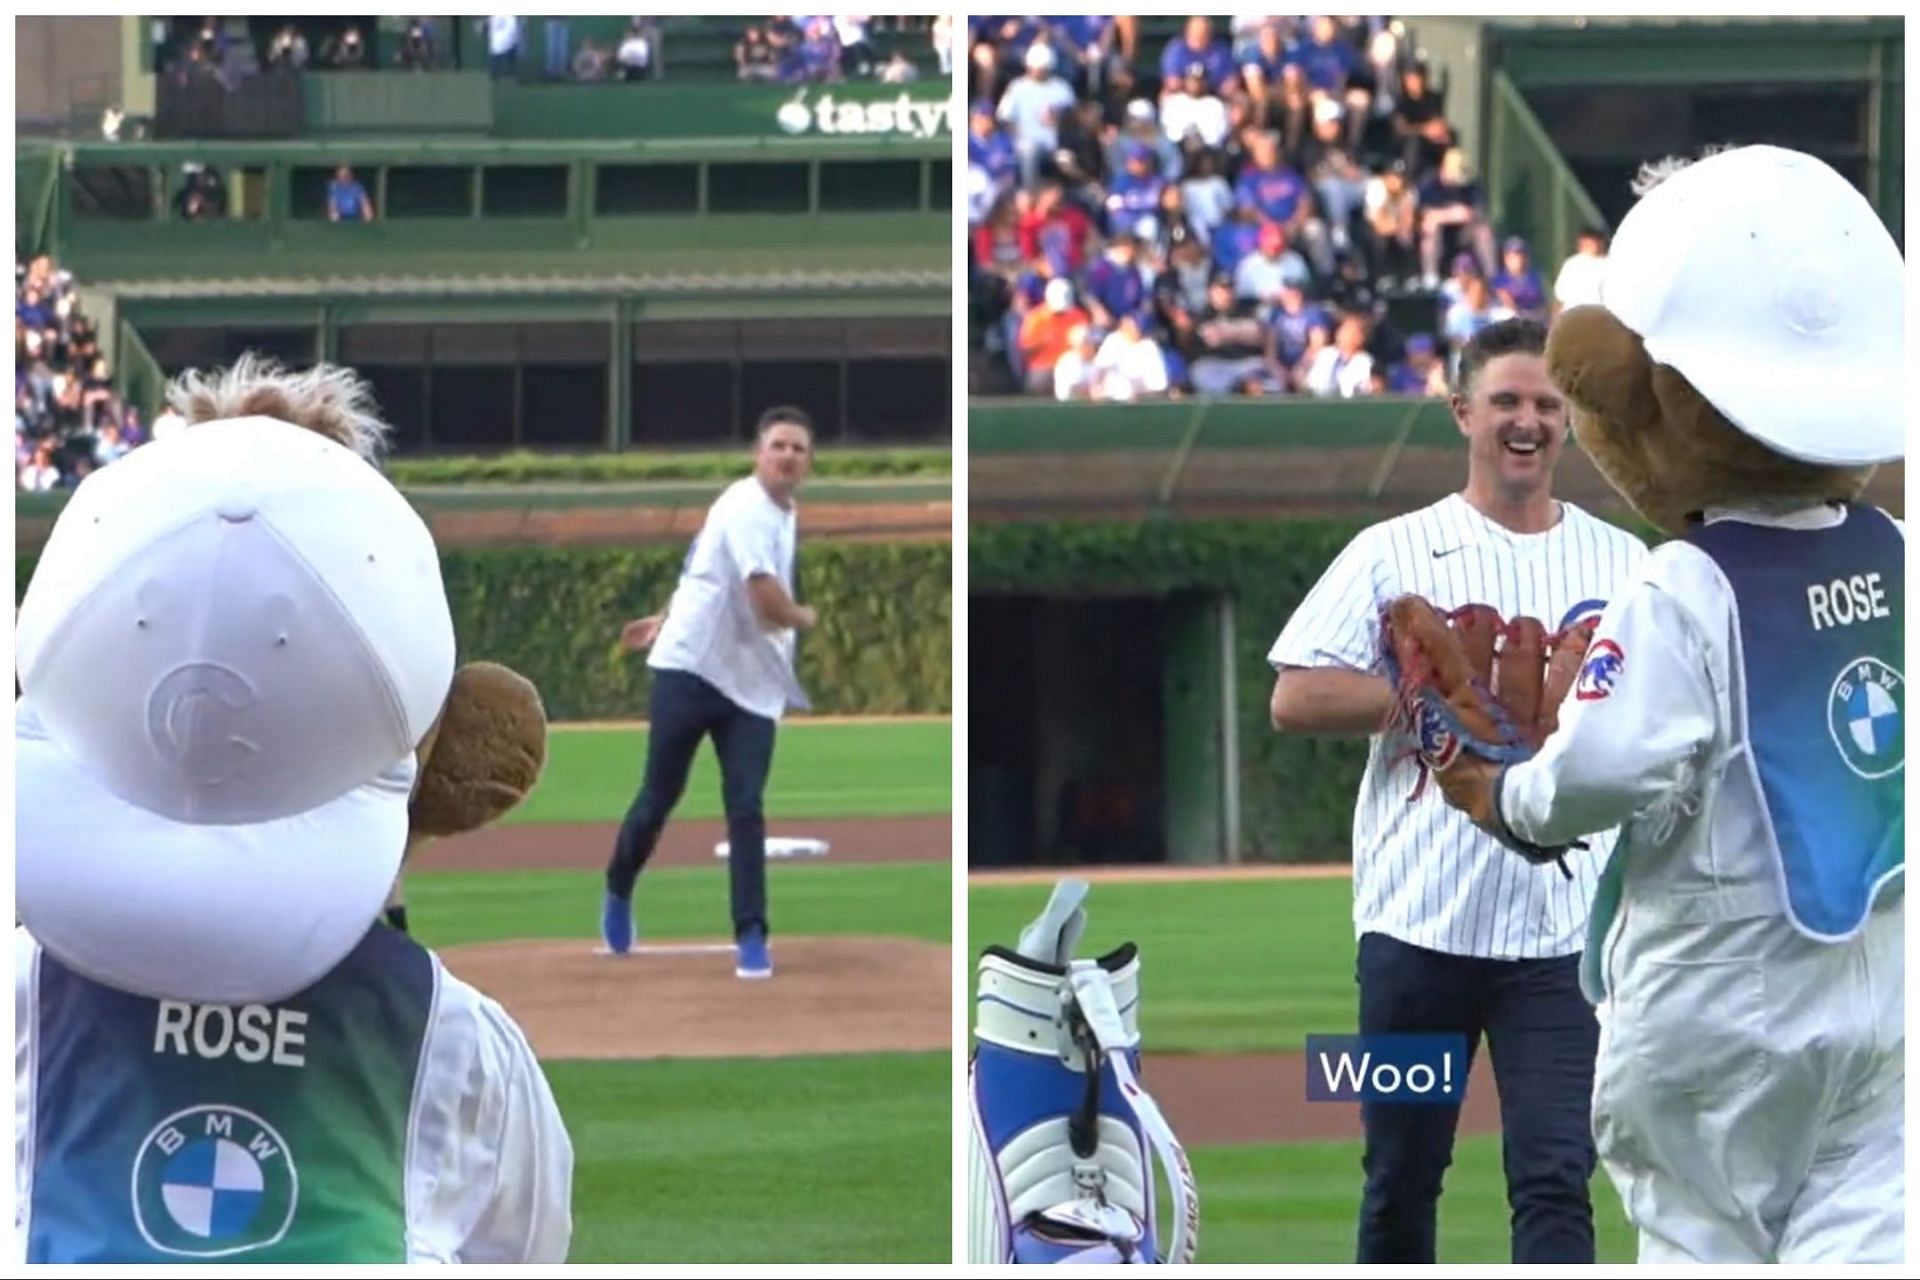 Justin Rose made the ceremonial pitch at the Chicago Cubs versus White Sox match( Image via PGA Tour)